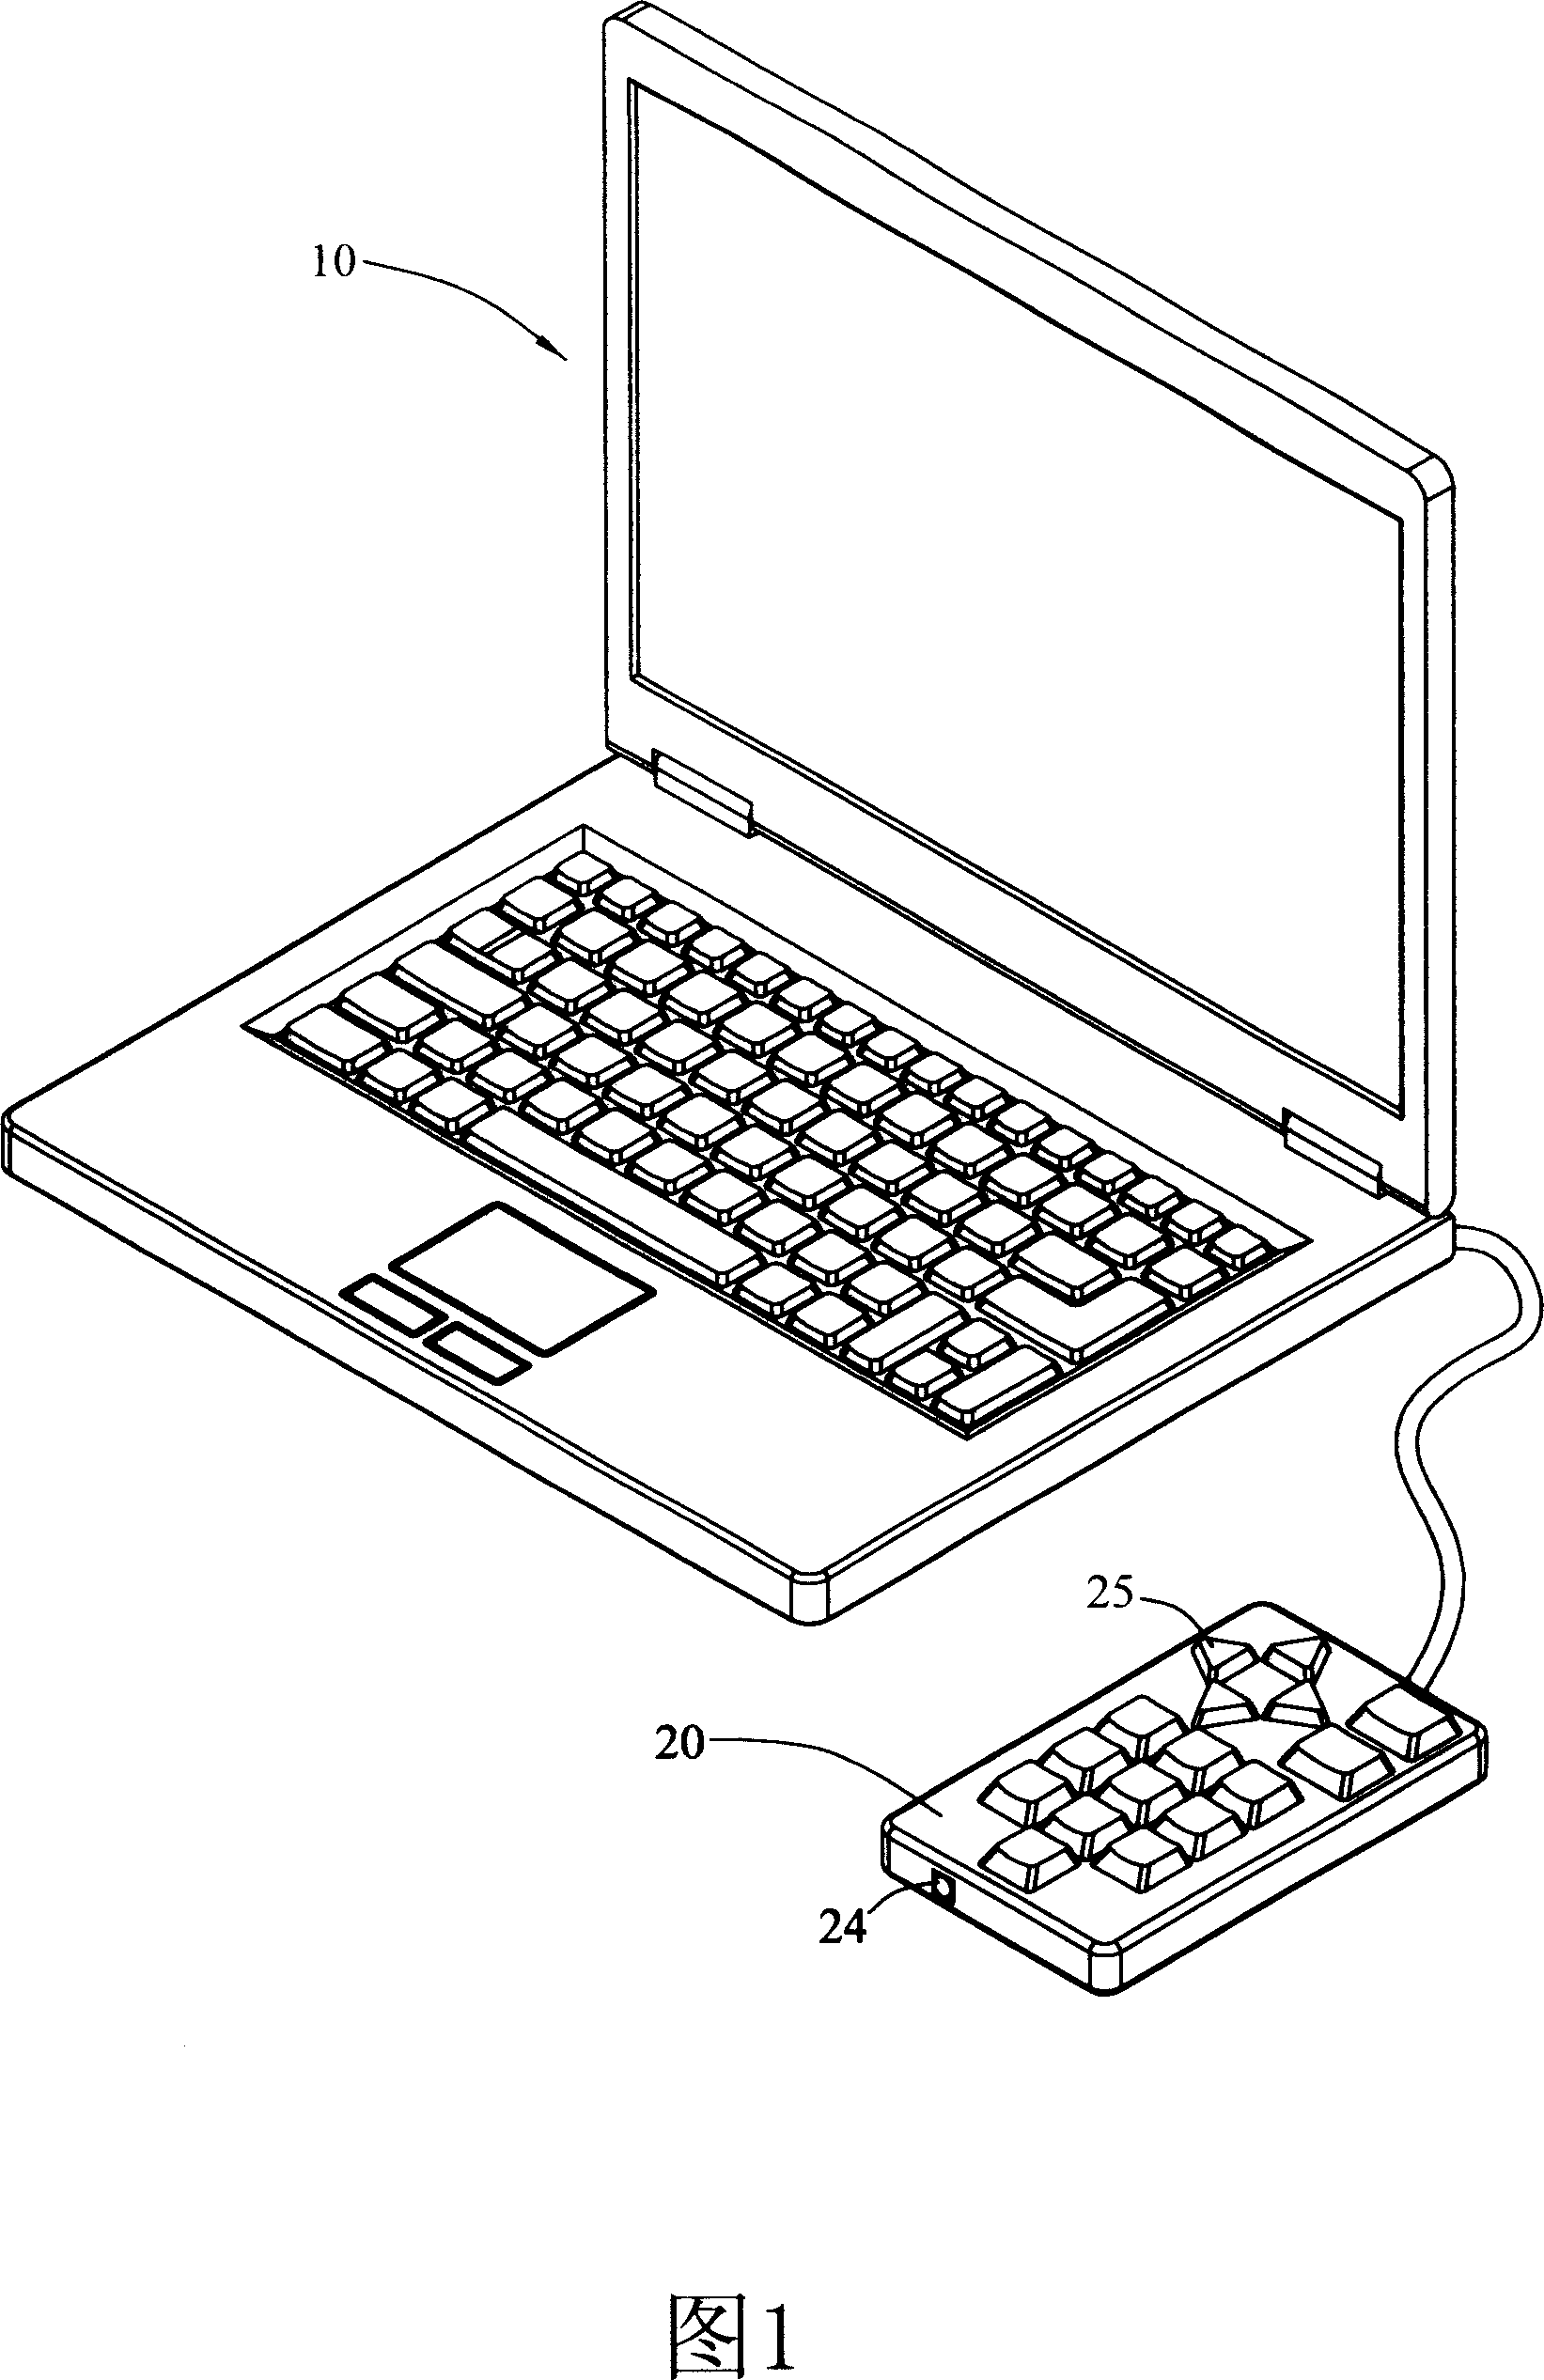 Remote control device capable of automatically switching channels